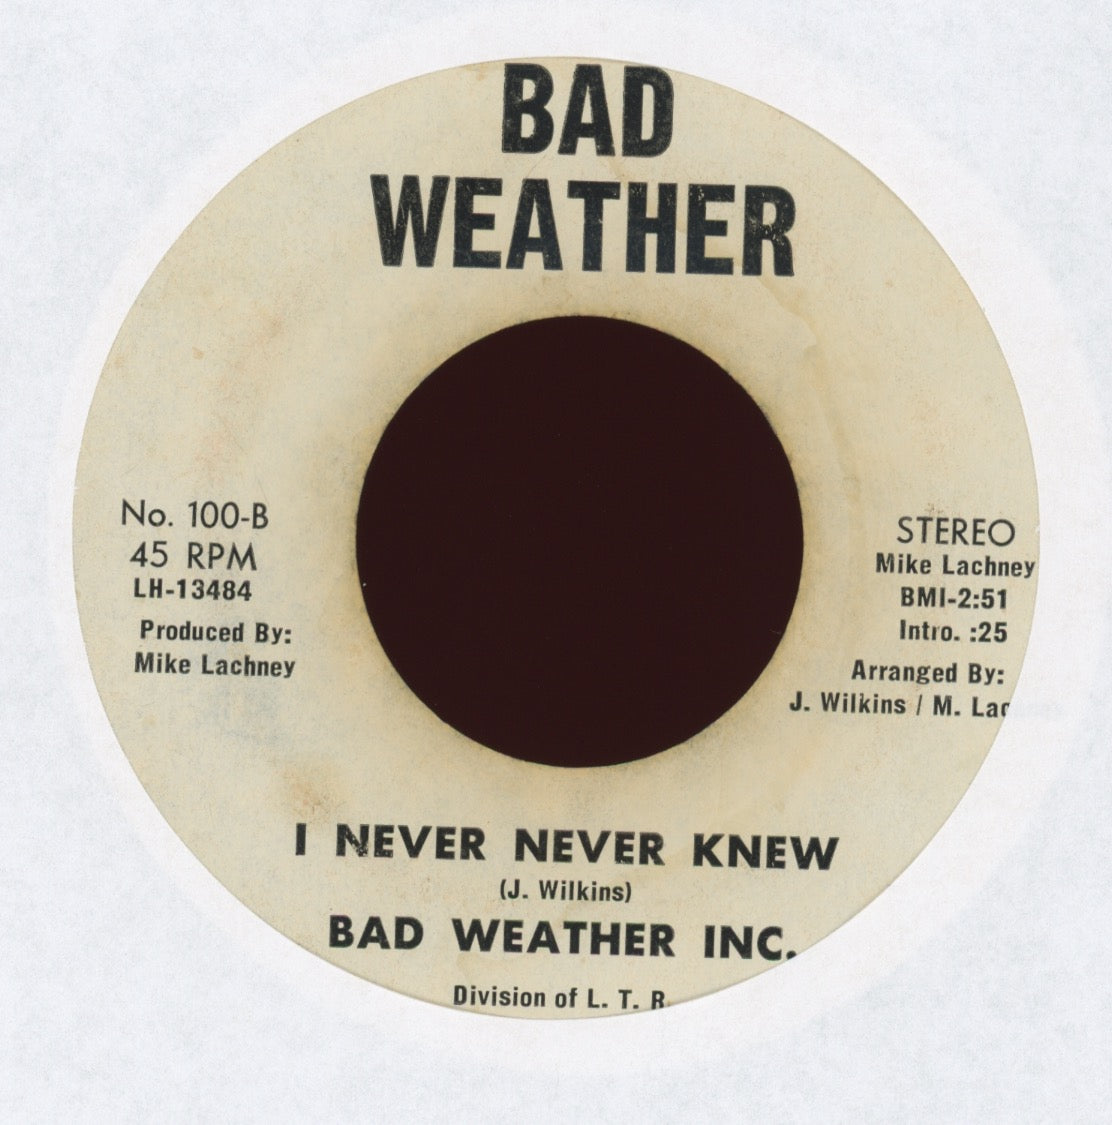 Bad Weather Inc - I Never Never Knew on Bad Weather